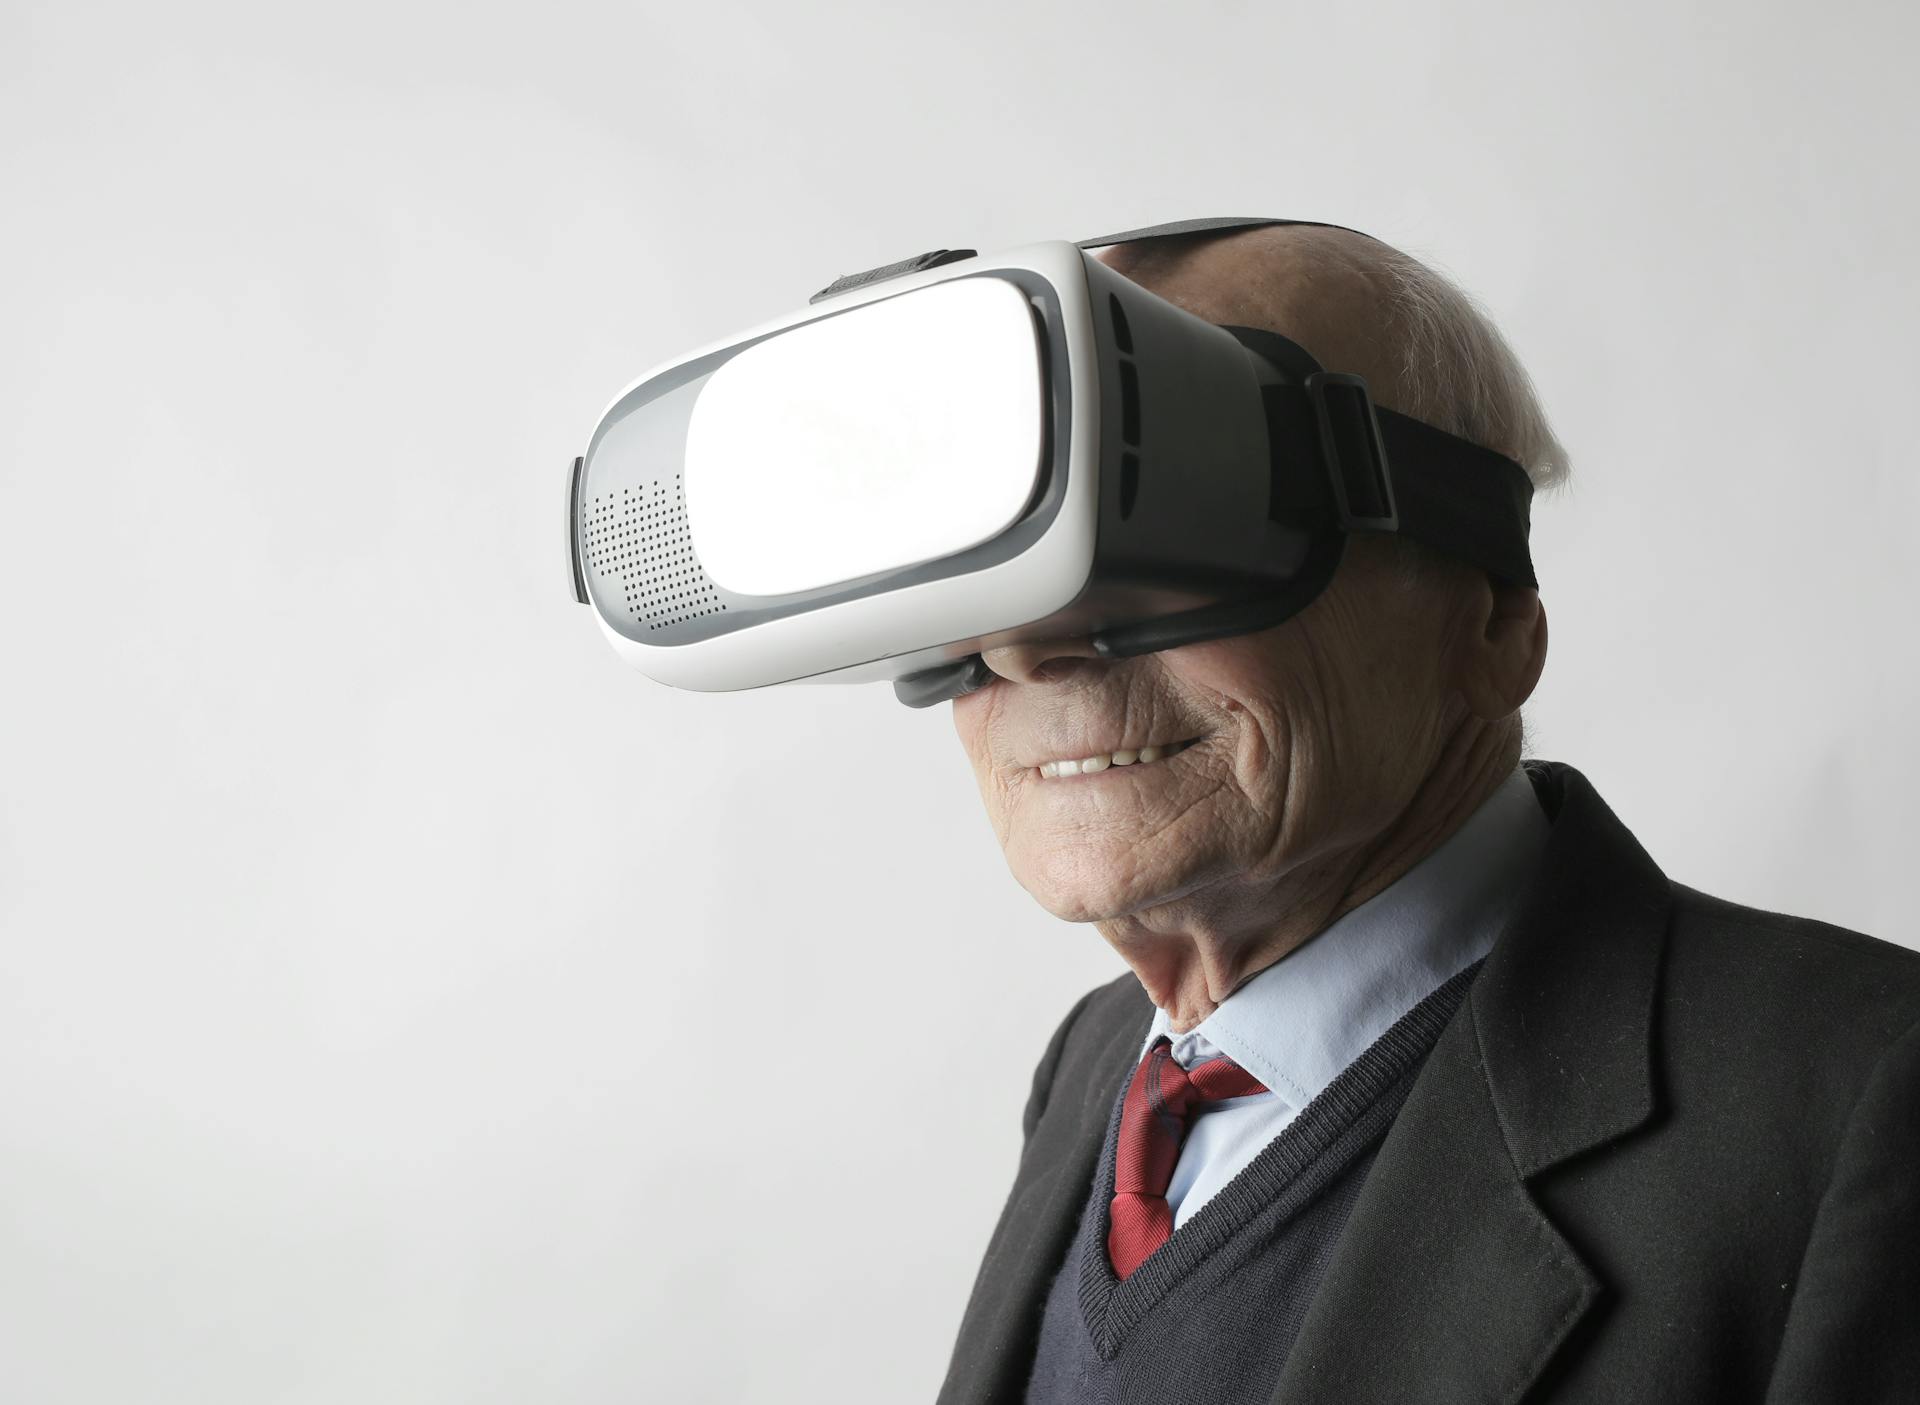 Free Smiling elderly gentleman wearing classy suit experiencing virtual reality while using modern headset on white background Stock Photo